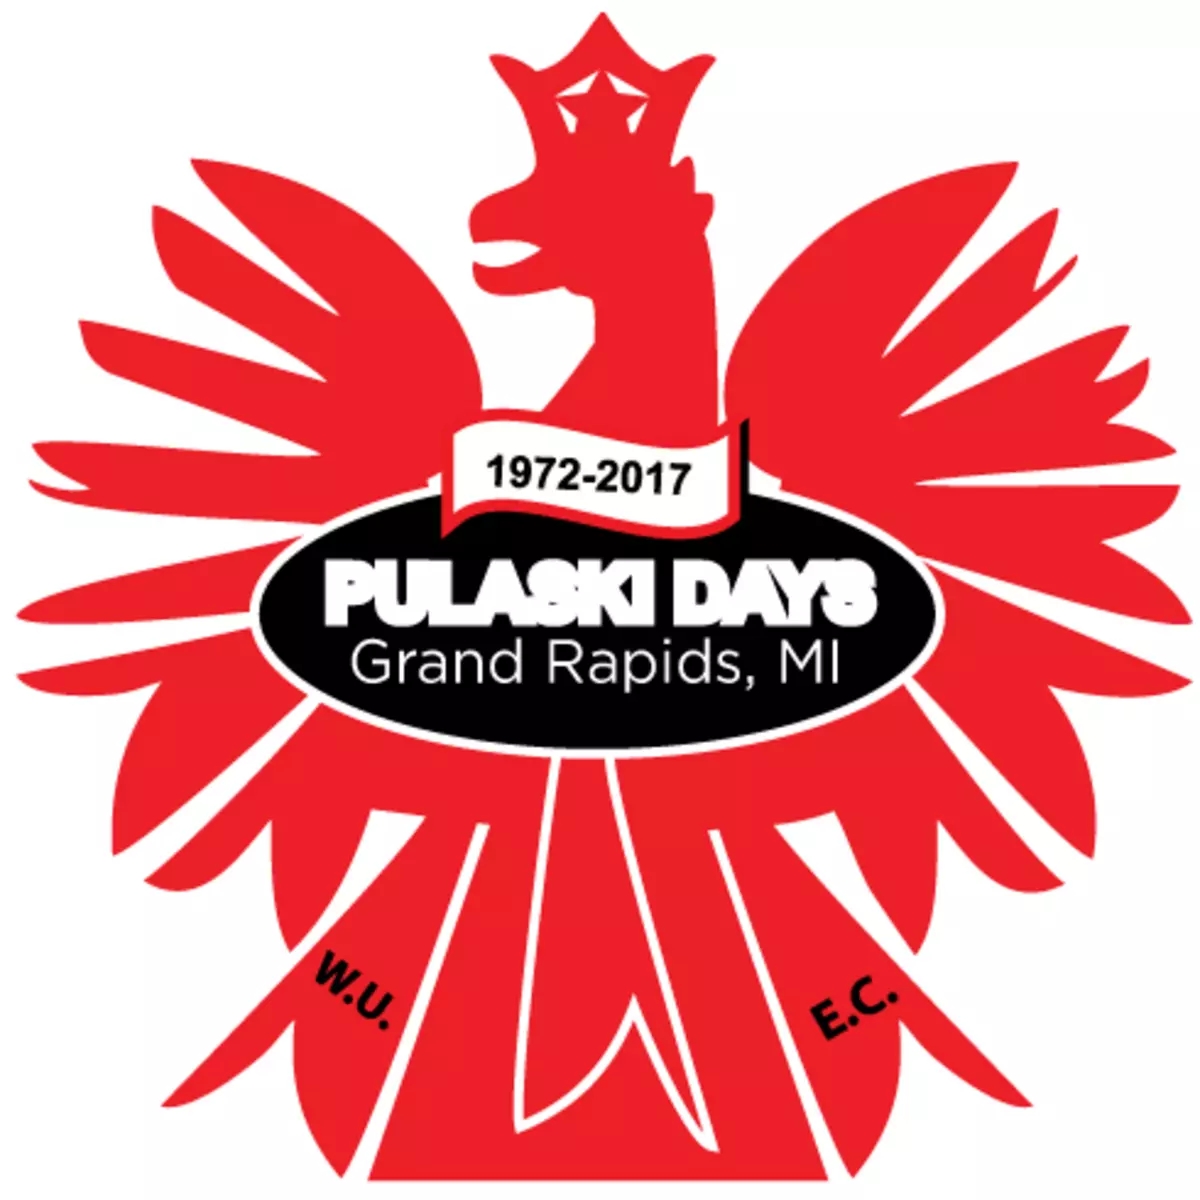 This Weekend is Pulaski Days in Grand Rapids